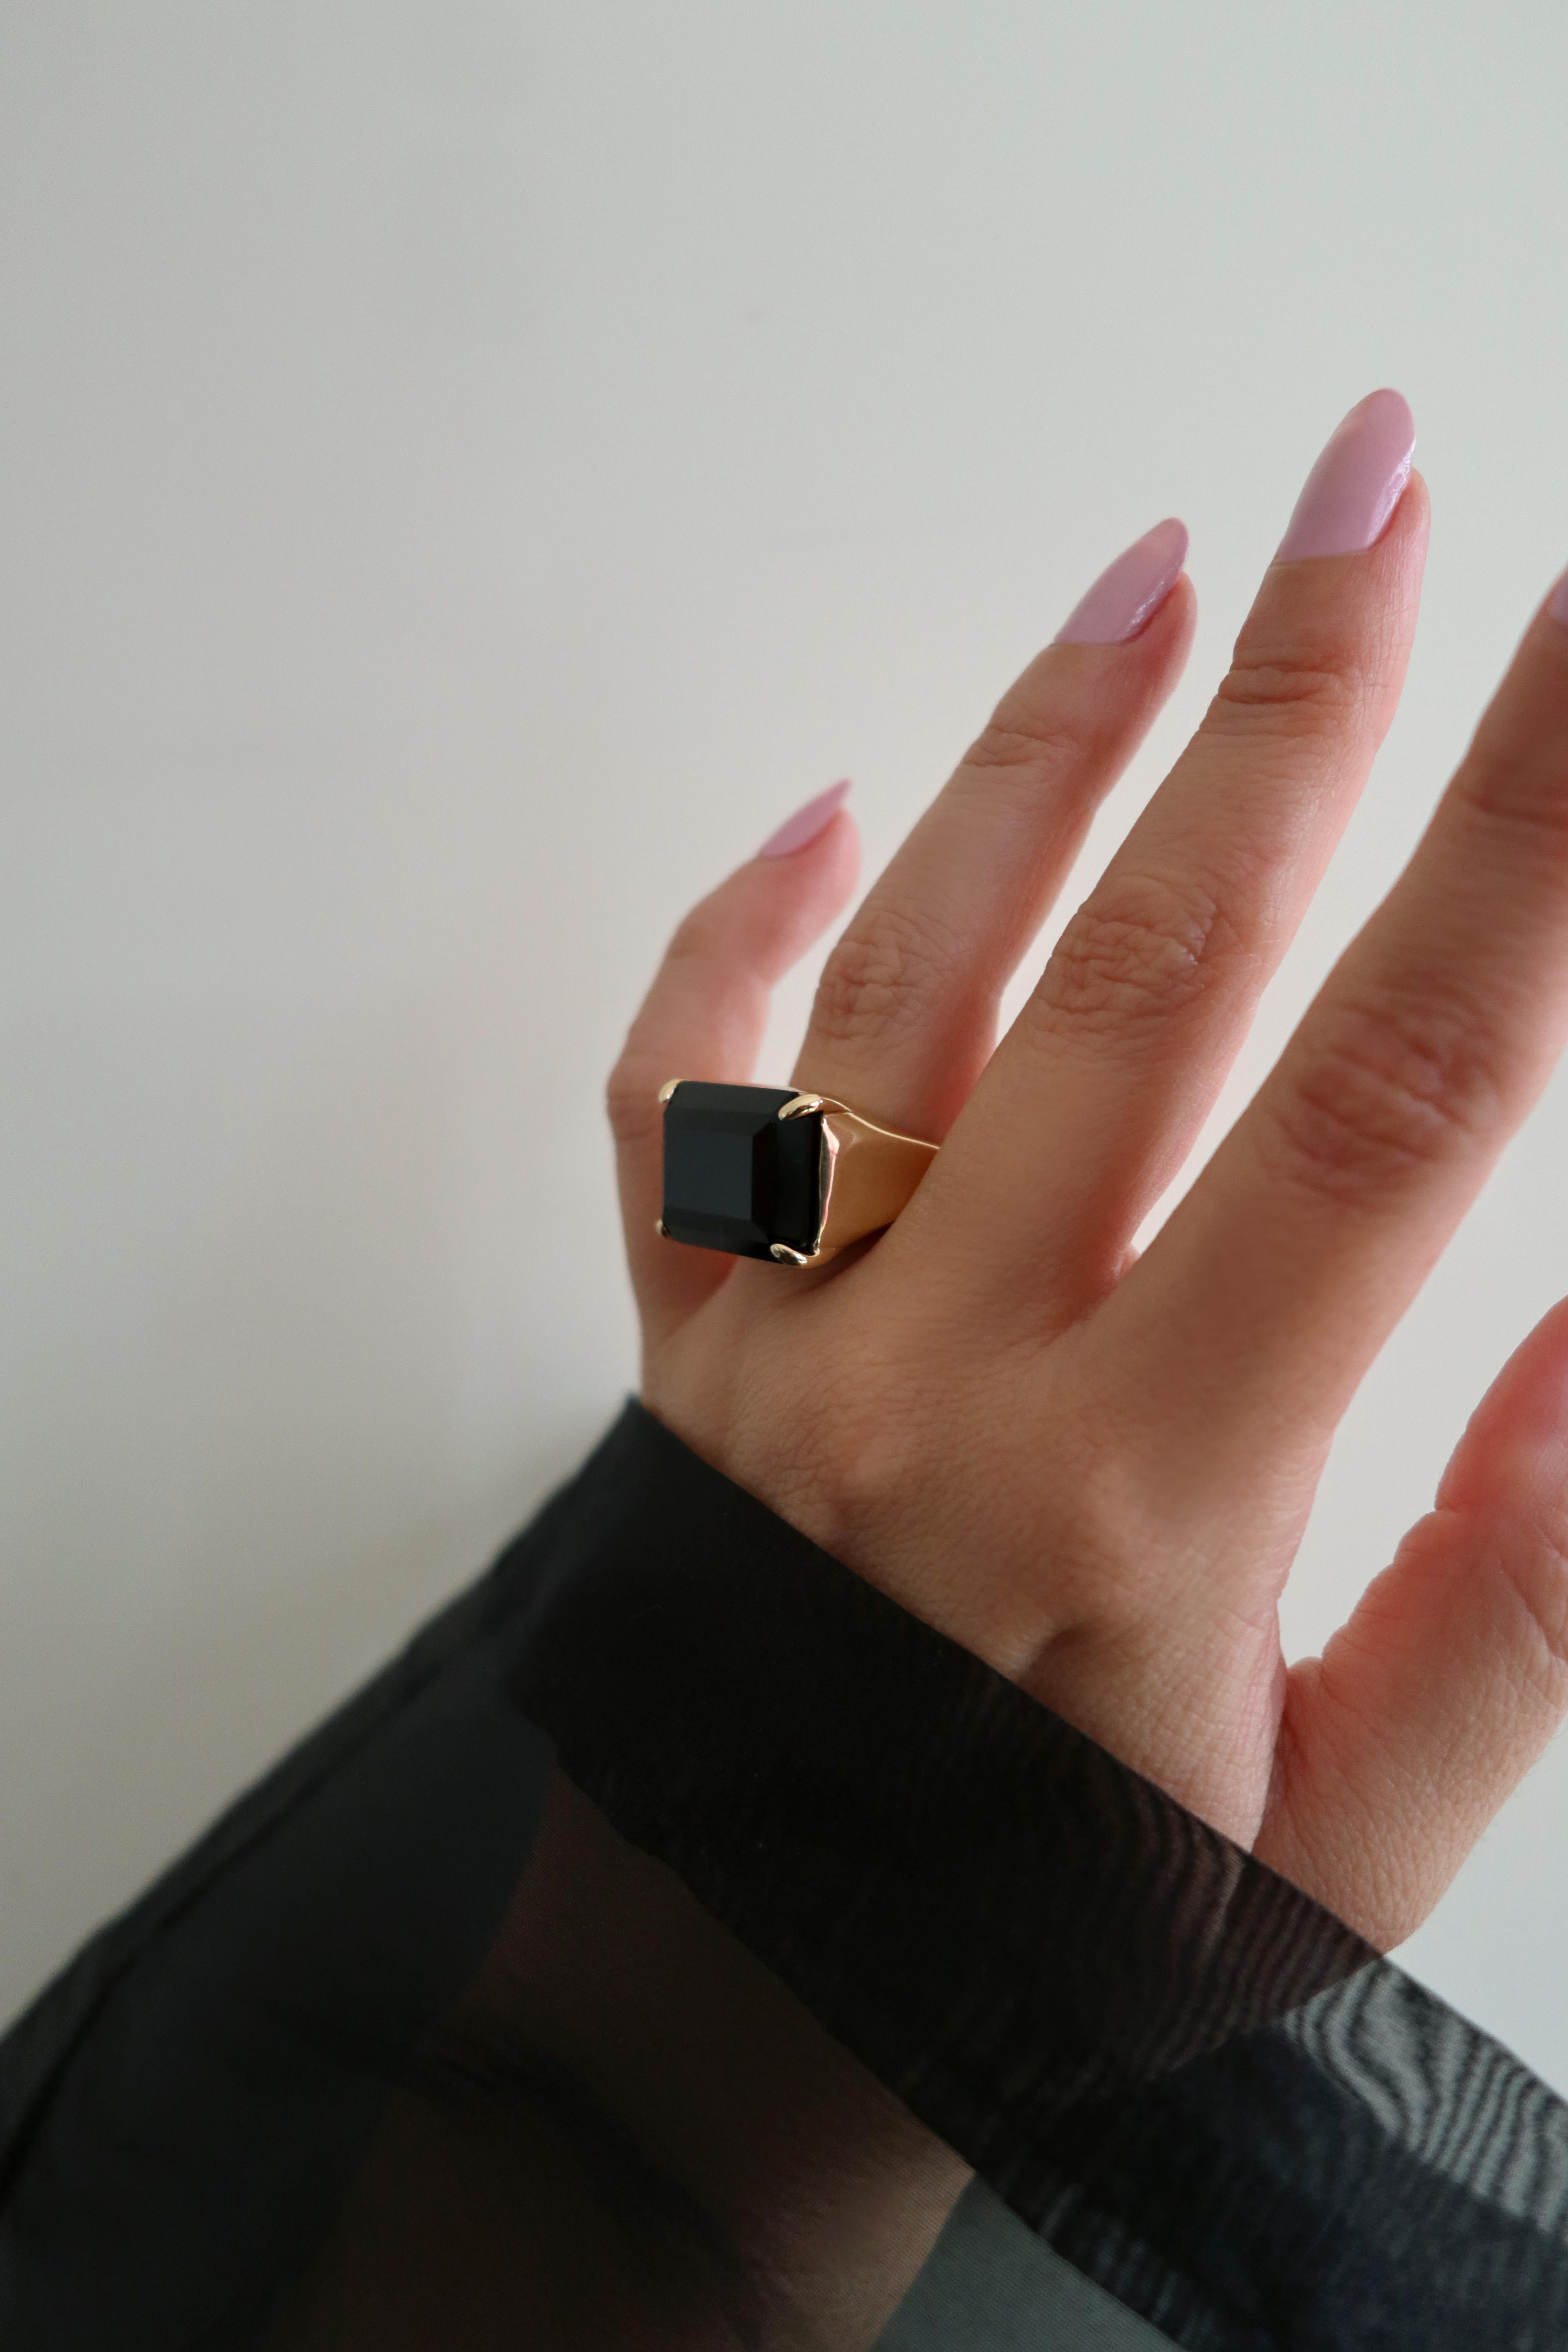 A particularly eccentric piece of jewelry reminiscent of the 1970s for a woman with a strong character. The elegant Black Onyx of its kind that gives harmony worn on every outfi.

925 sterling silver

Black Onyx

Adjustable size 

